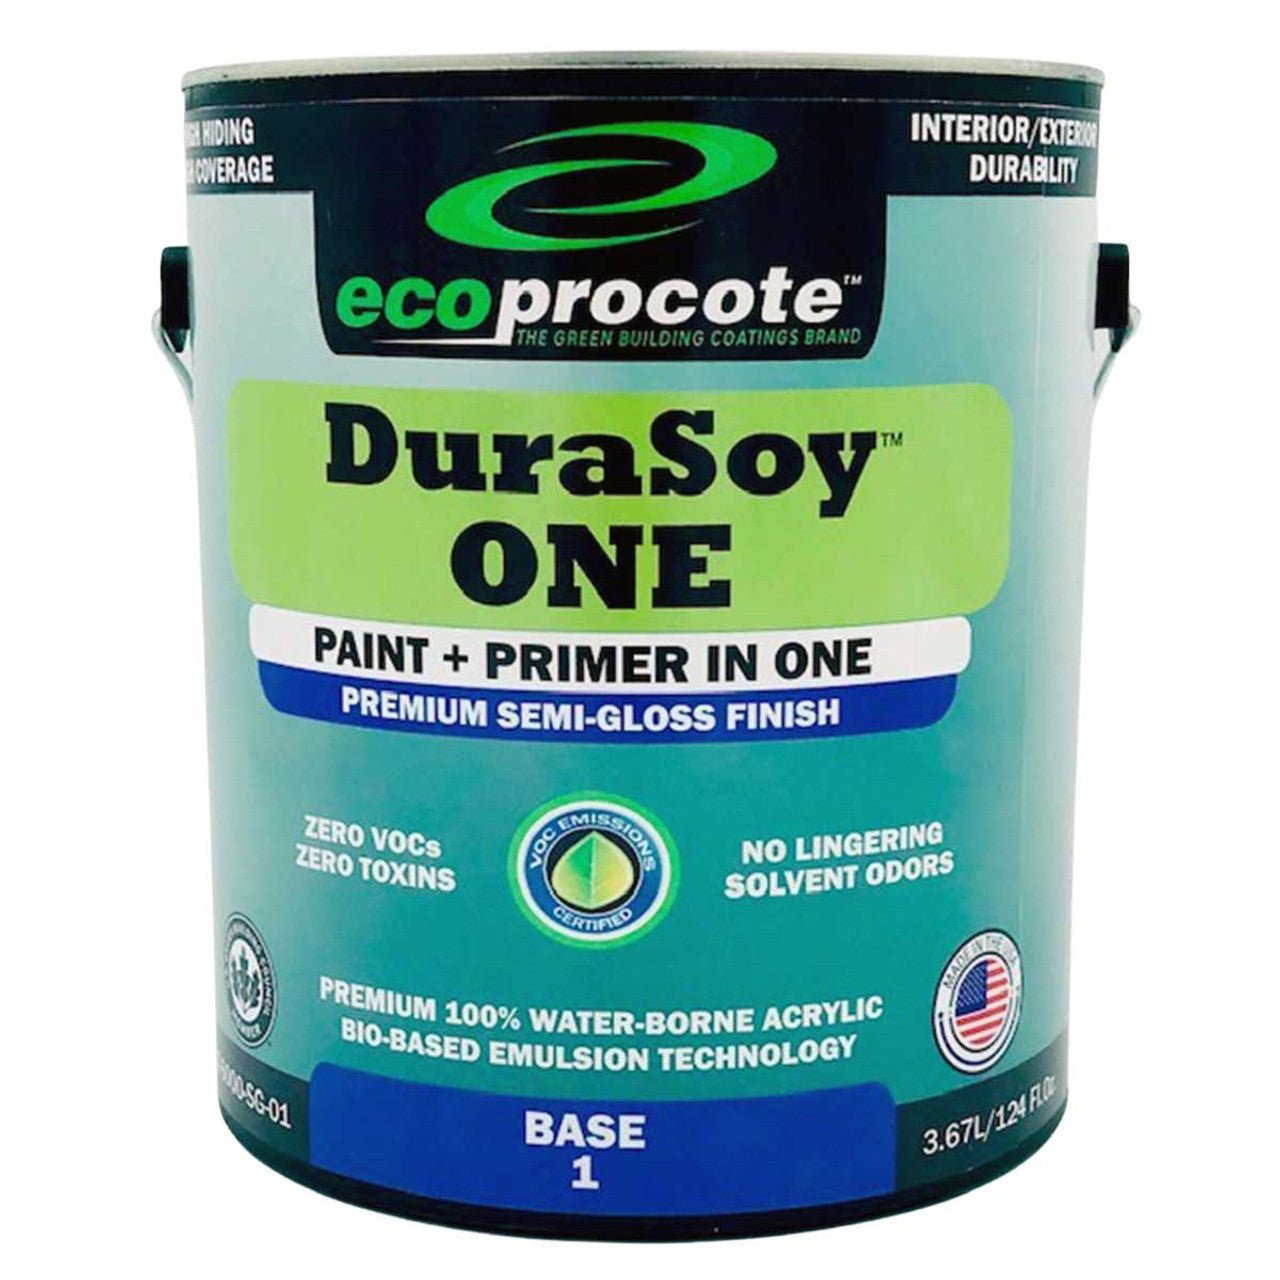 DuraSoy ONE Paint + Primer, Semi-Gloss, Factory Tinted